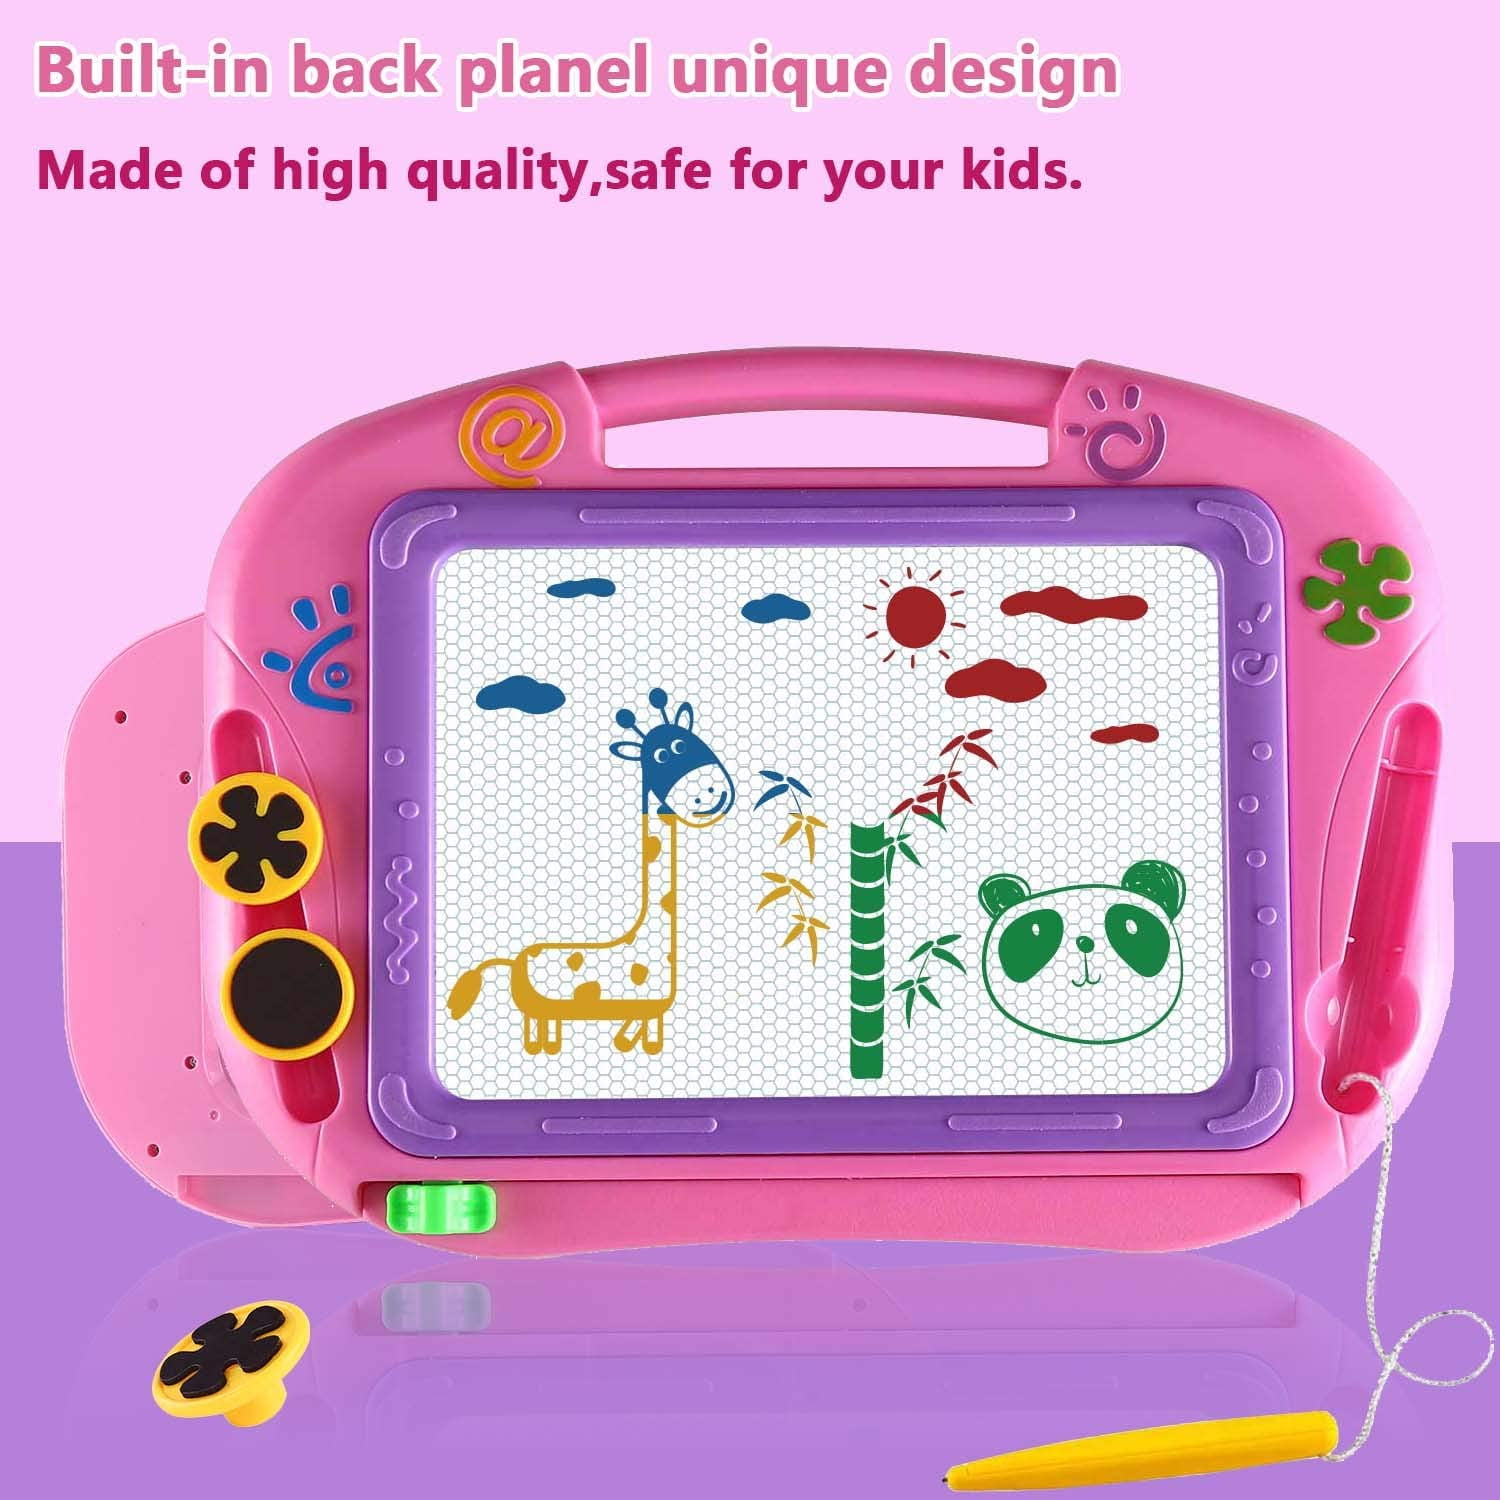 pozzolanas Magnetic Drawing Board for Kids and Toddlers Doodle Board Writing Painting Pad Comes with a 4-Color Travel Game Birthday Present for Toddler 